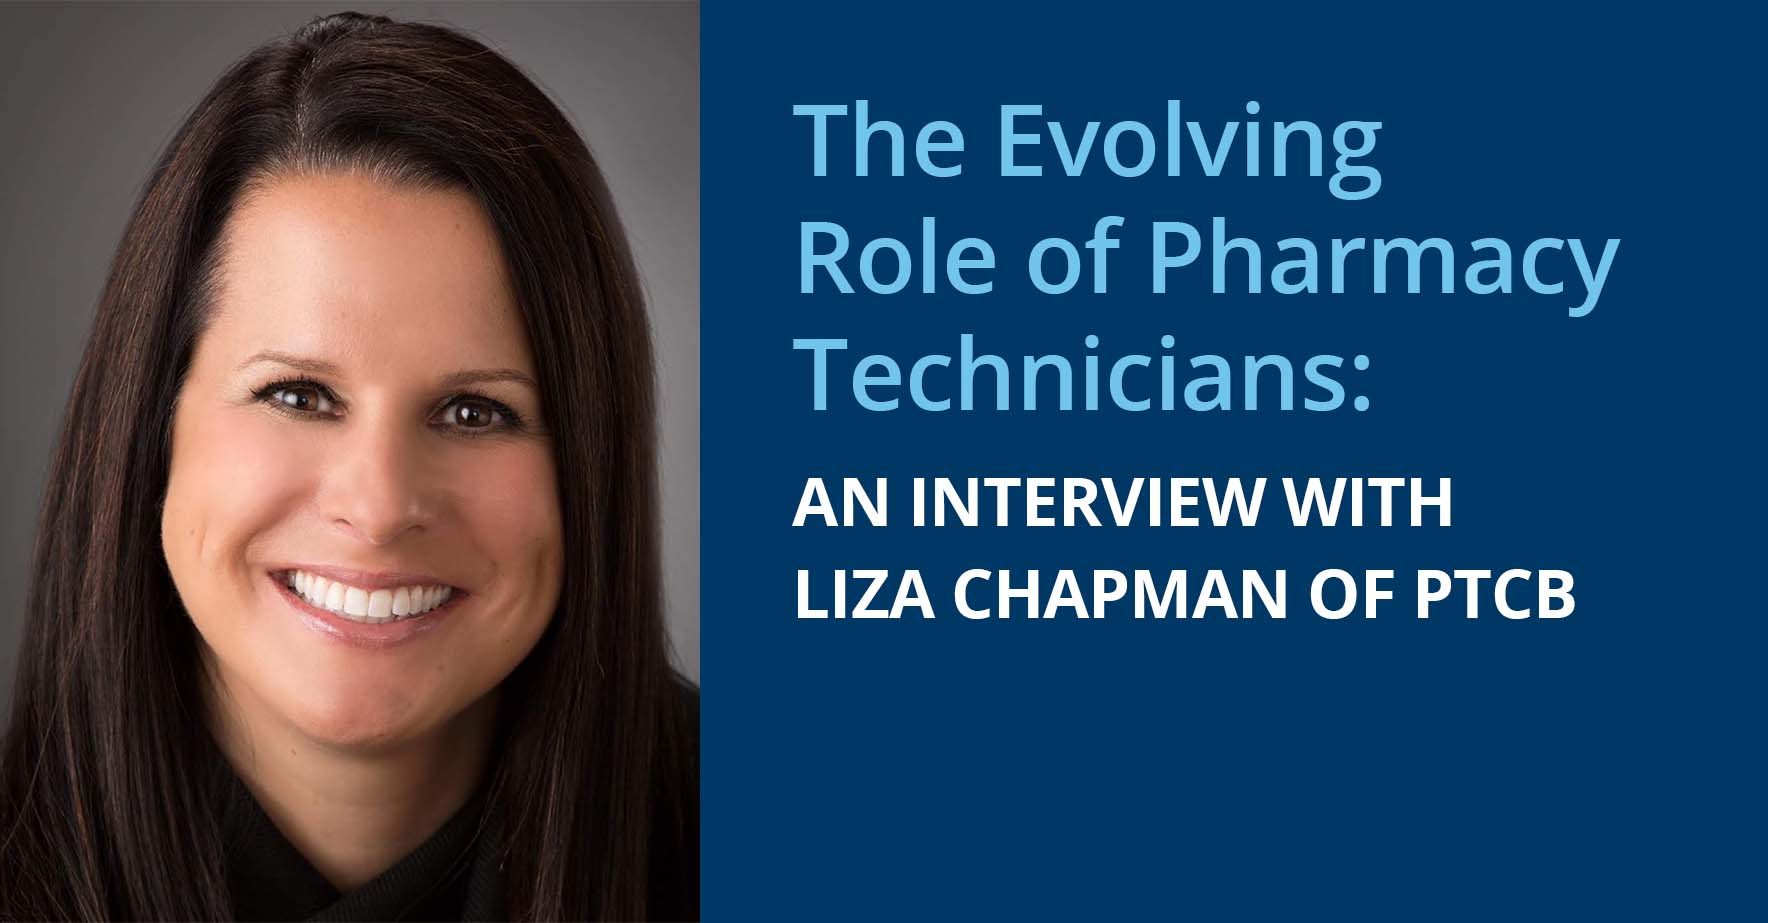 the_evolving_role_of_pharmacy_technicians_an_interview_with_liza_chapman_of_ptcb.jpg.